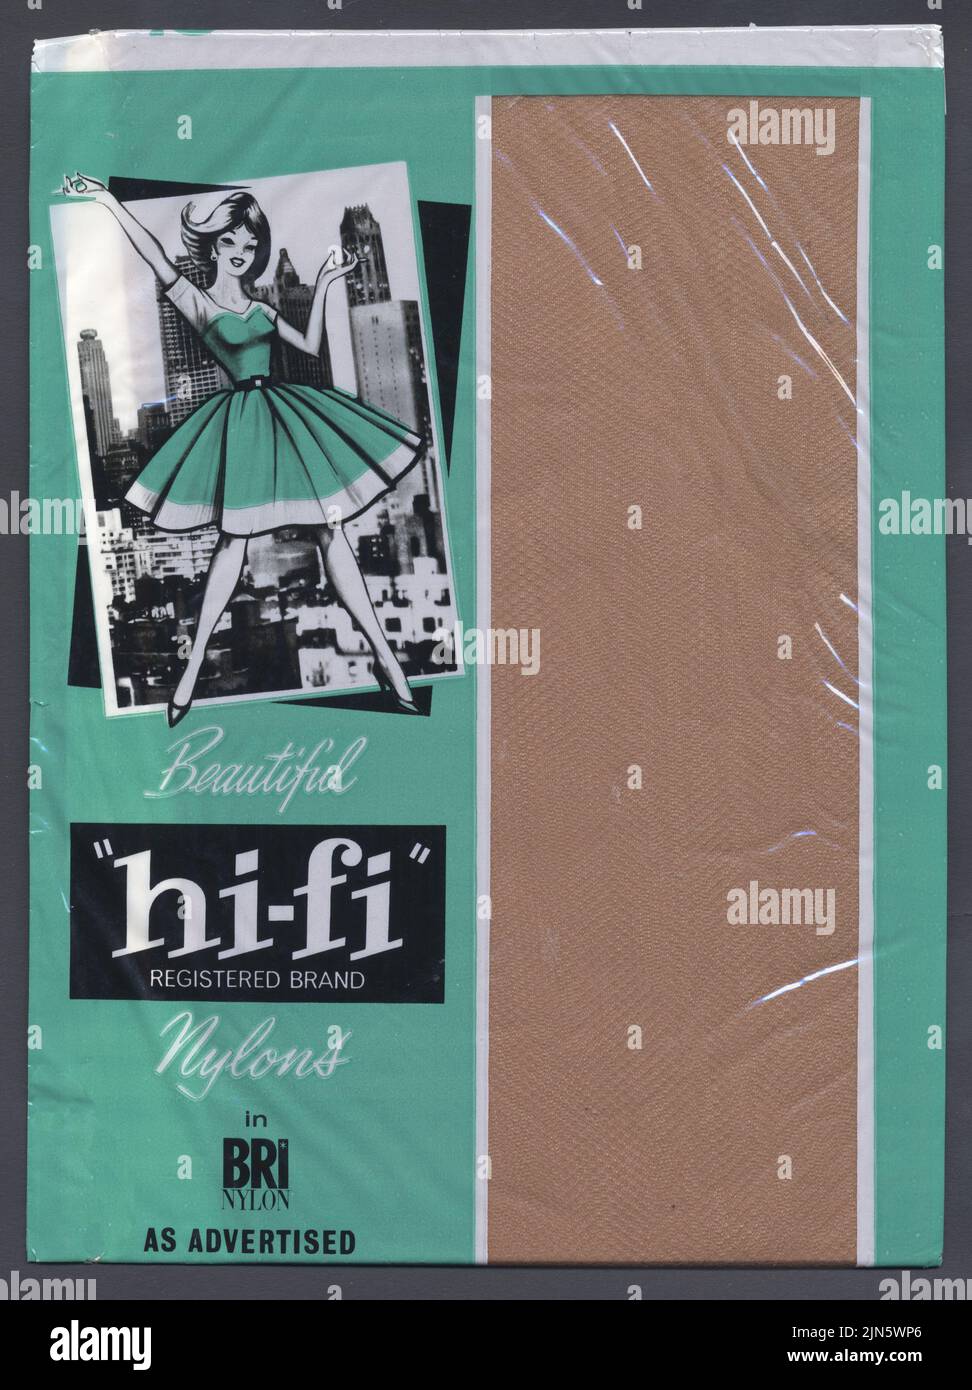 Hi-fi brand Nylons packet, early 1960s. Illustration of woman against a photograph of American skyline.  Hi-fi registered brand, no address given. Price 3/11d. Bri Nylon (launched 1958). 'As advertised'. Original scan. Stock Photo